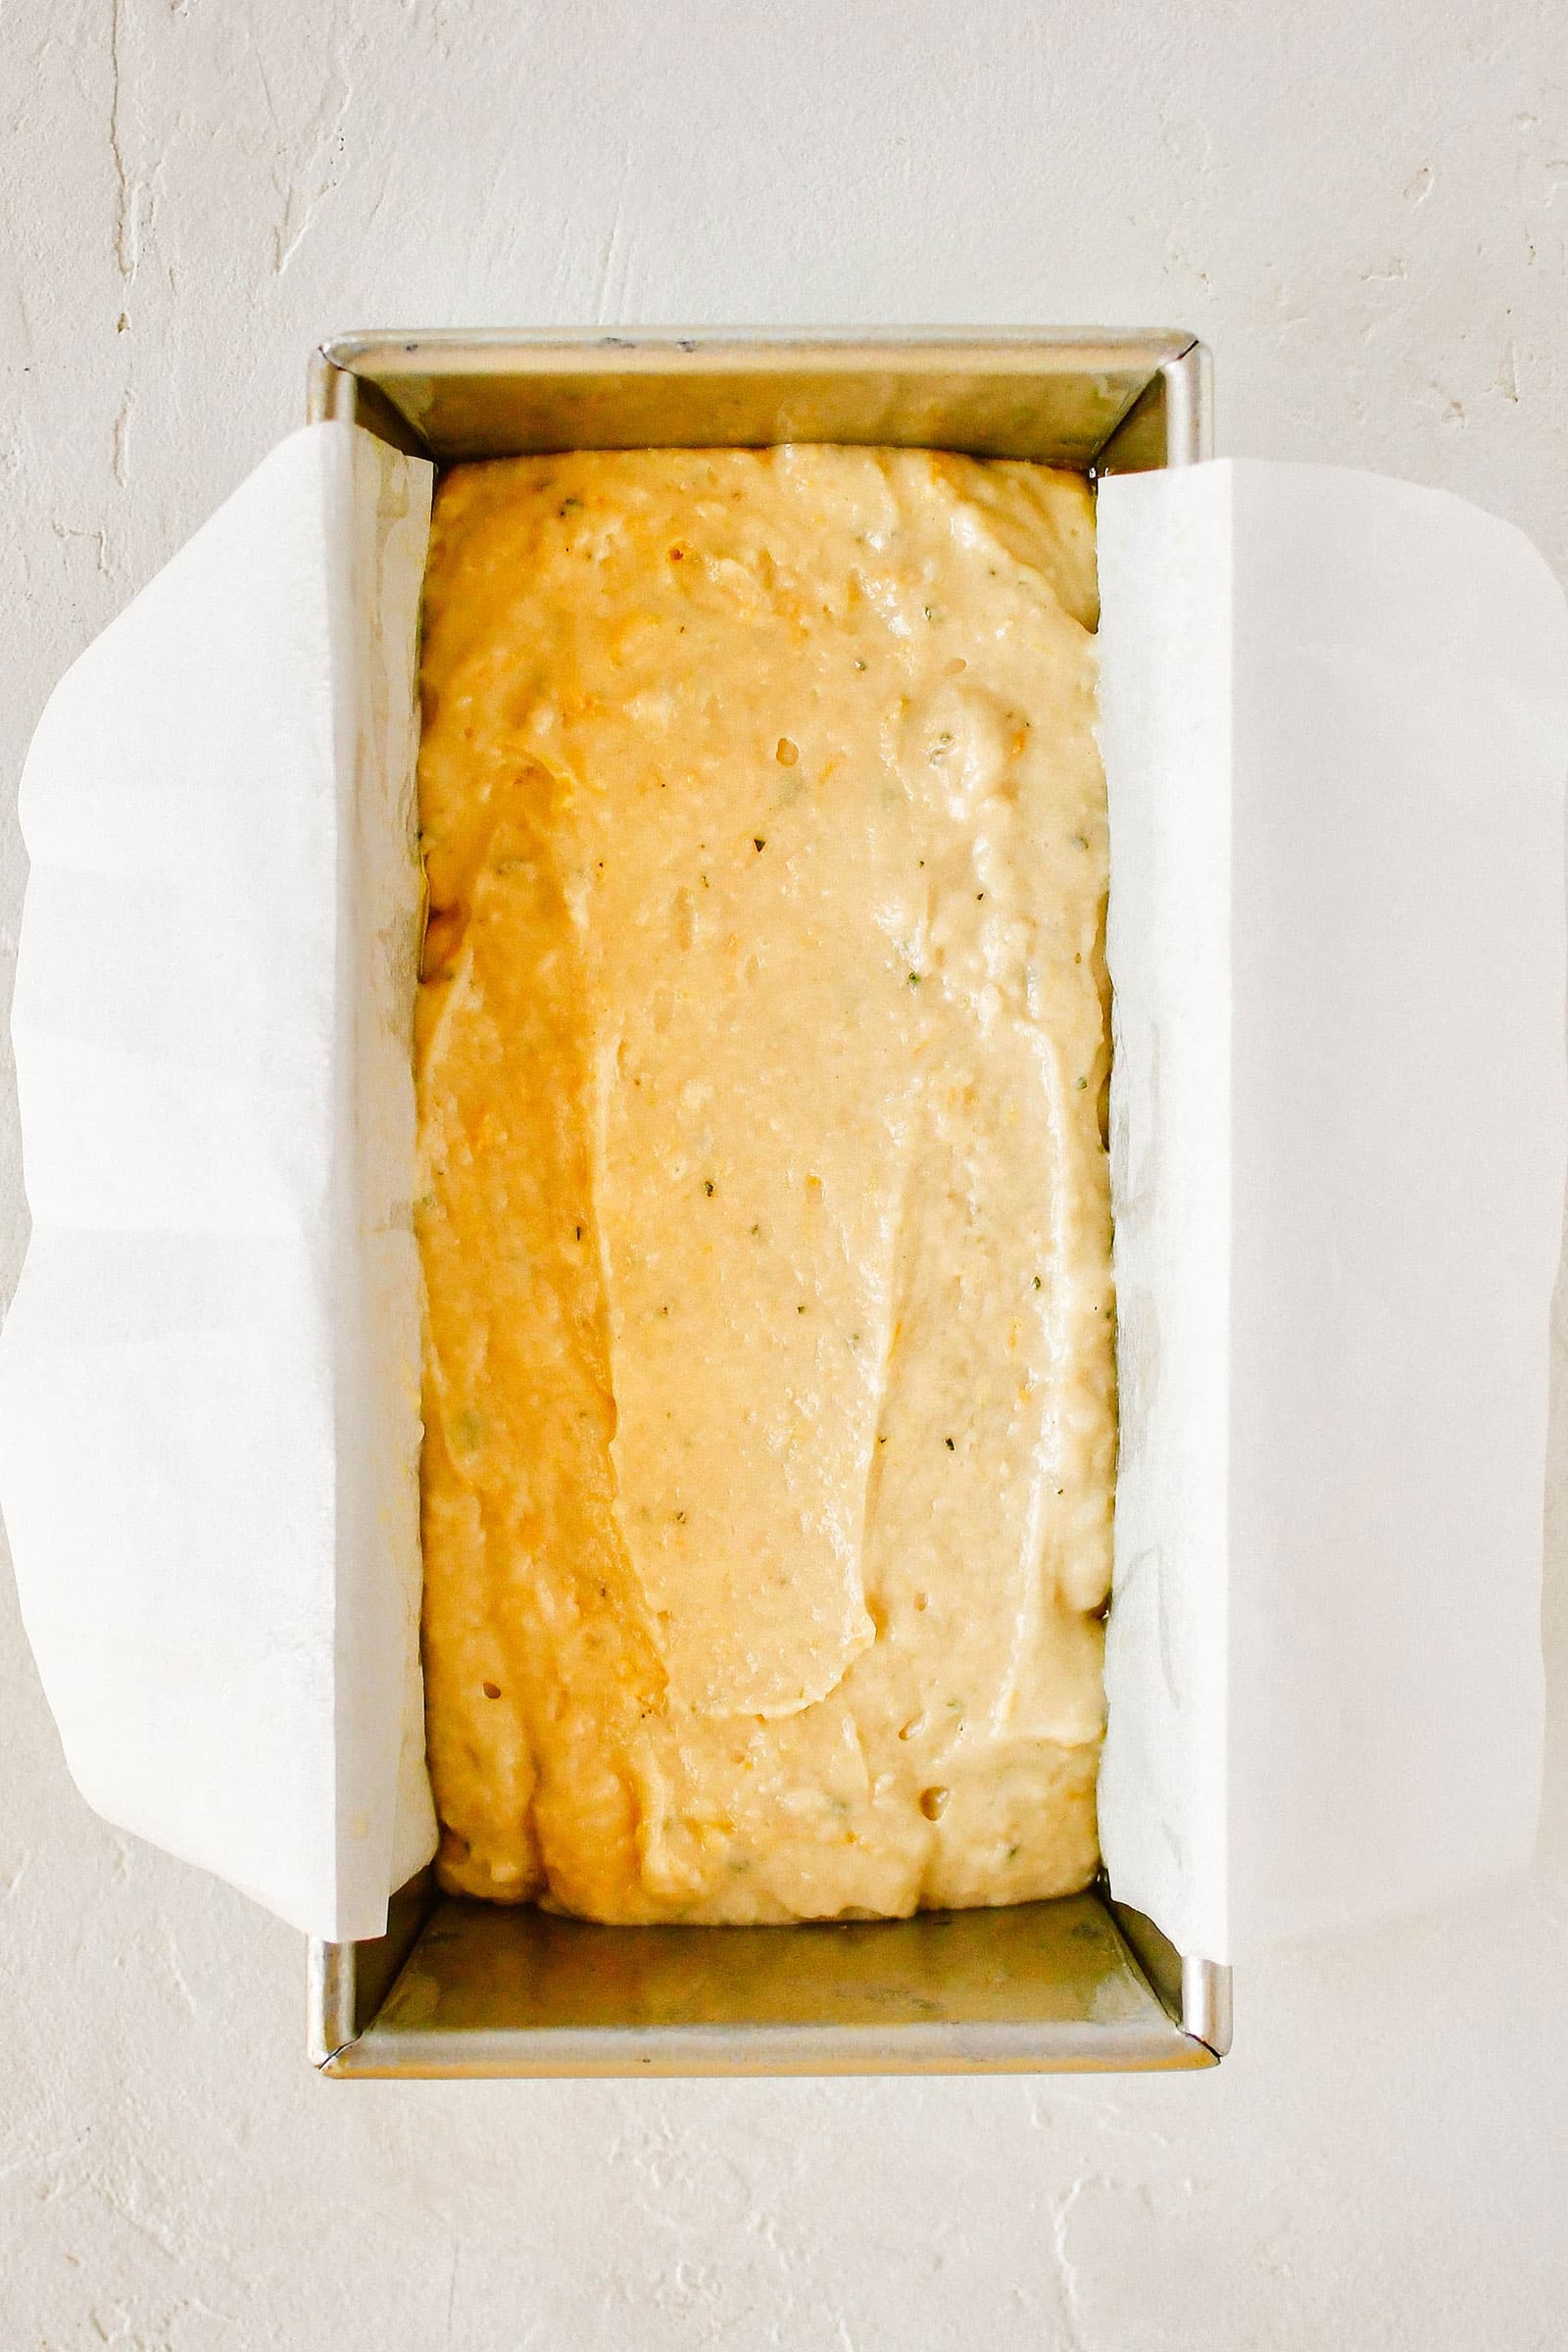 Parchment-lined loaf pan filled with bread batter